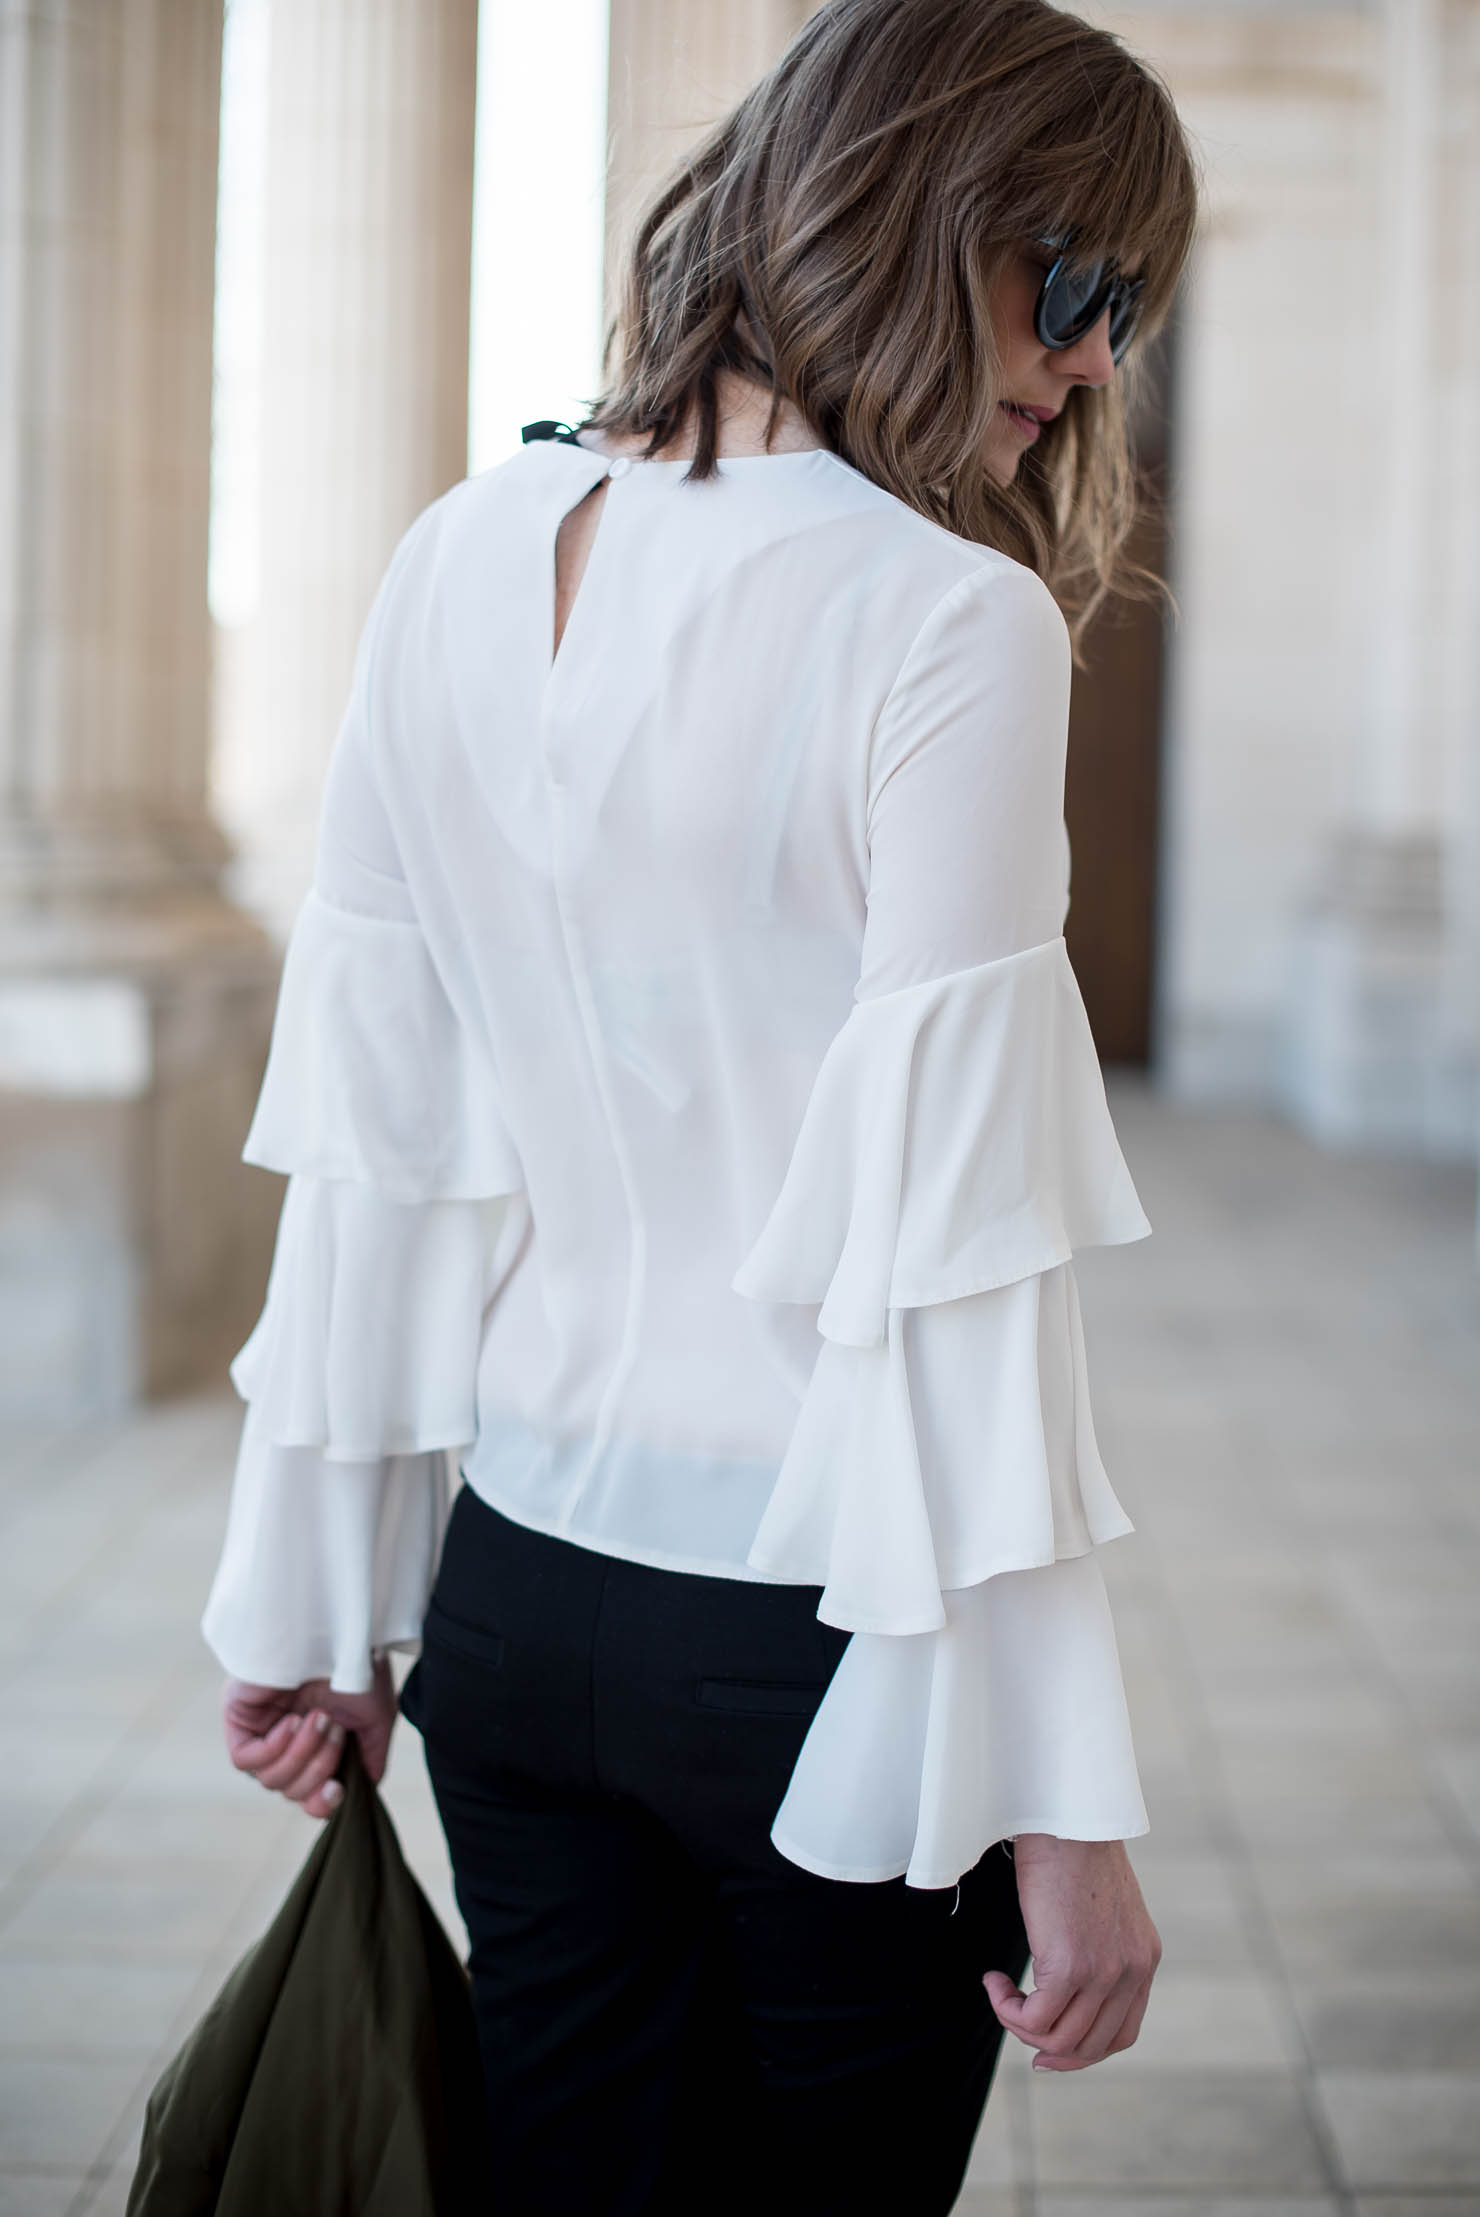 stying-a-ruffle-sleeve-blouse-springs-hottest-trend-bomber-jacket-spring-fashion-2017-zara-snakeskin-pumps-19